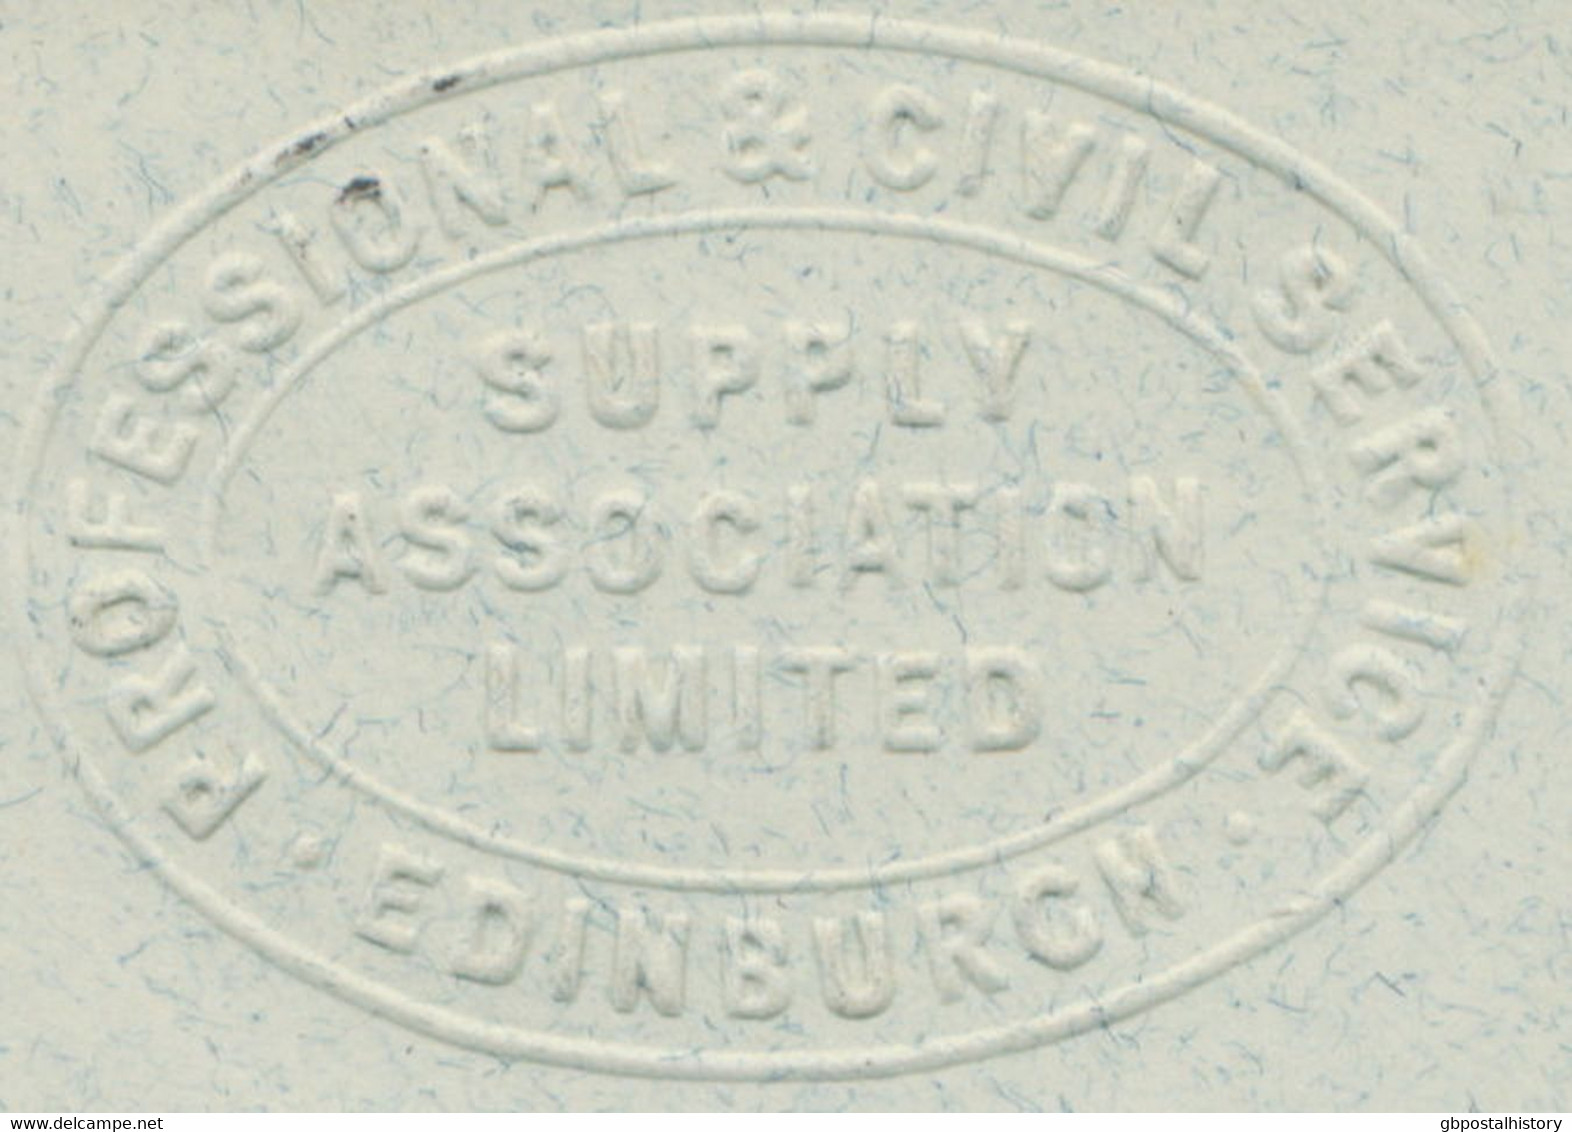 GB „EDINBURGH / 32“ Double Cirlce (29mm) Fine/very Fine QV ½d Embossed Stamped To Order Postal Stationery Envelope 1898 - Schotland